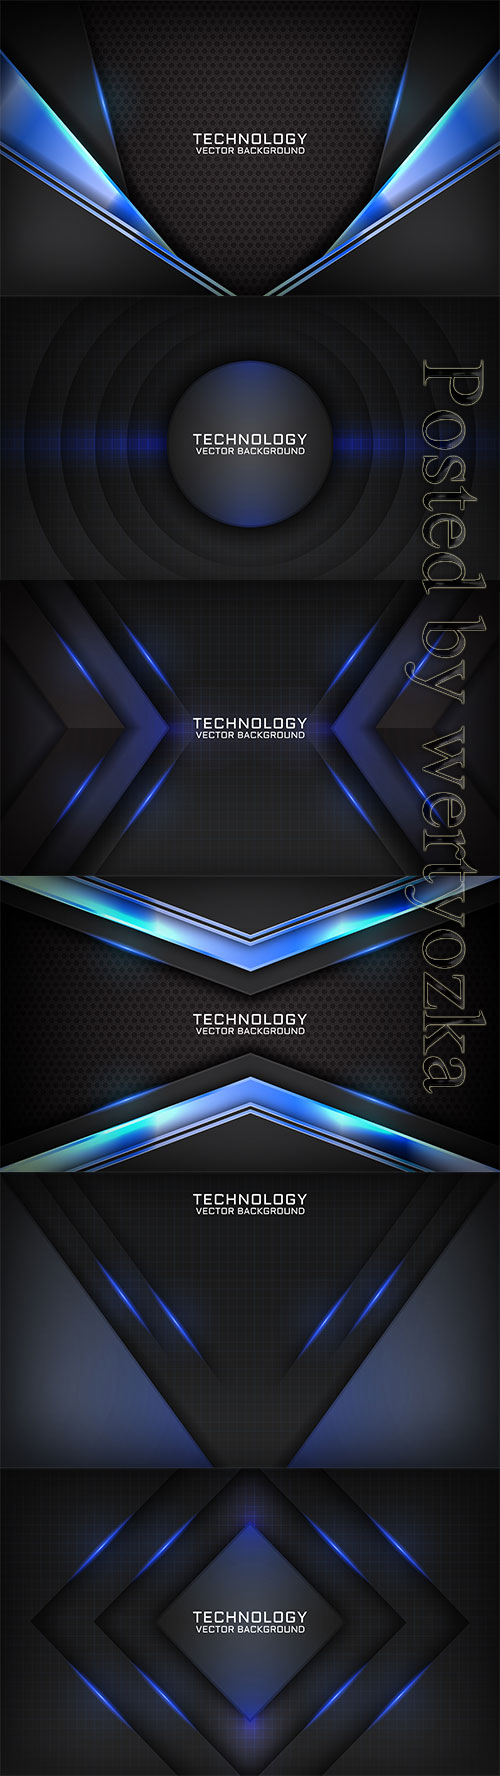 Abstract vector backgrounds with blue design